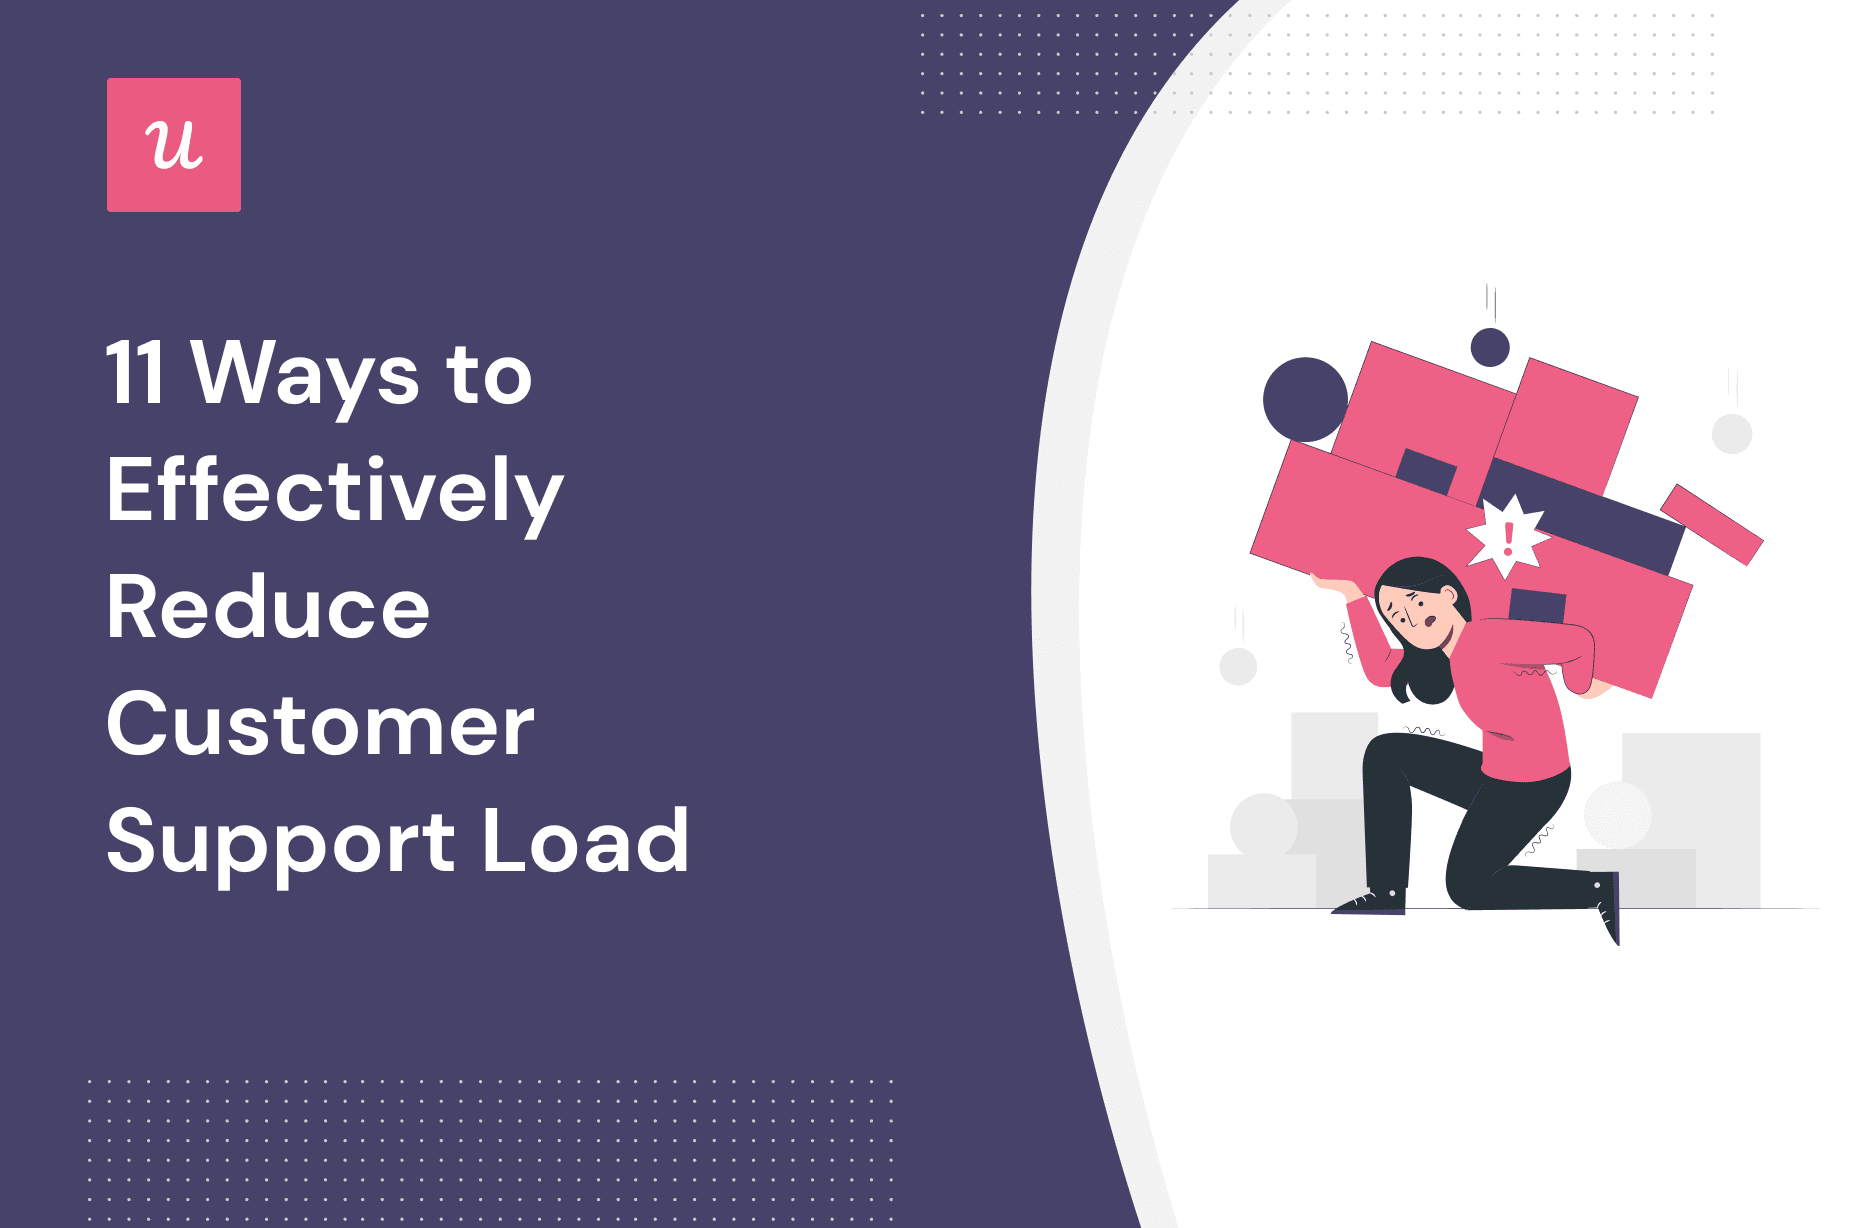 11 Ways to Effectively Reduce Customer Support Load cover